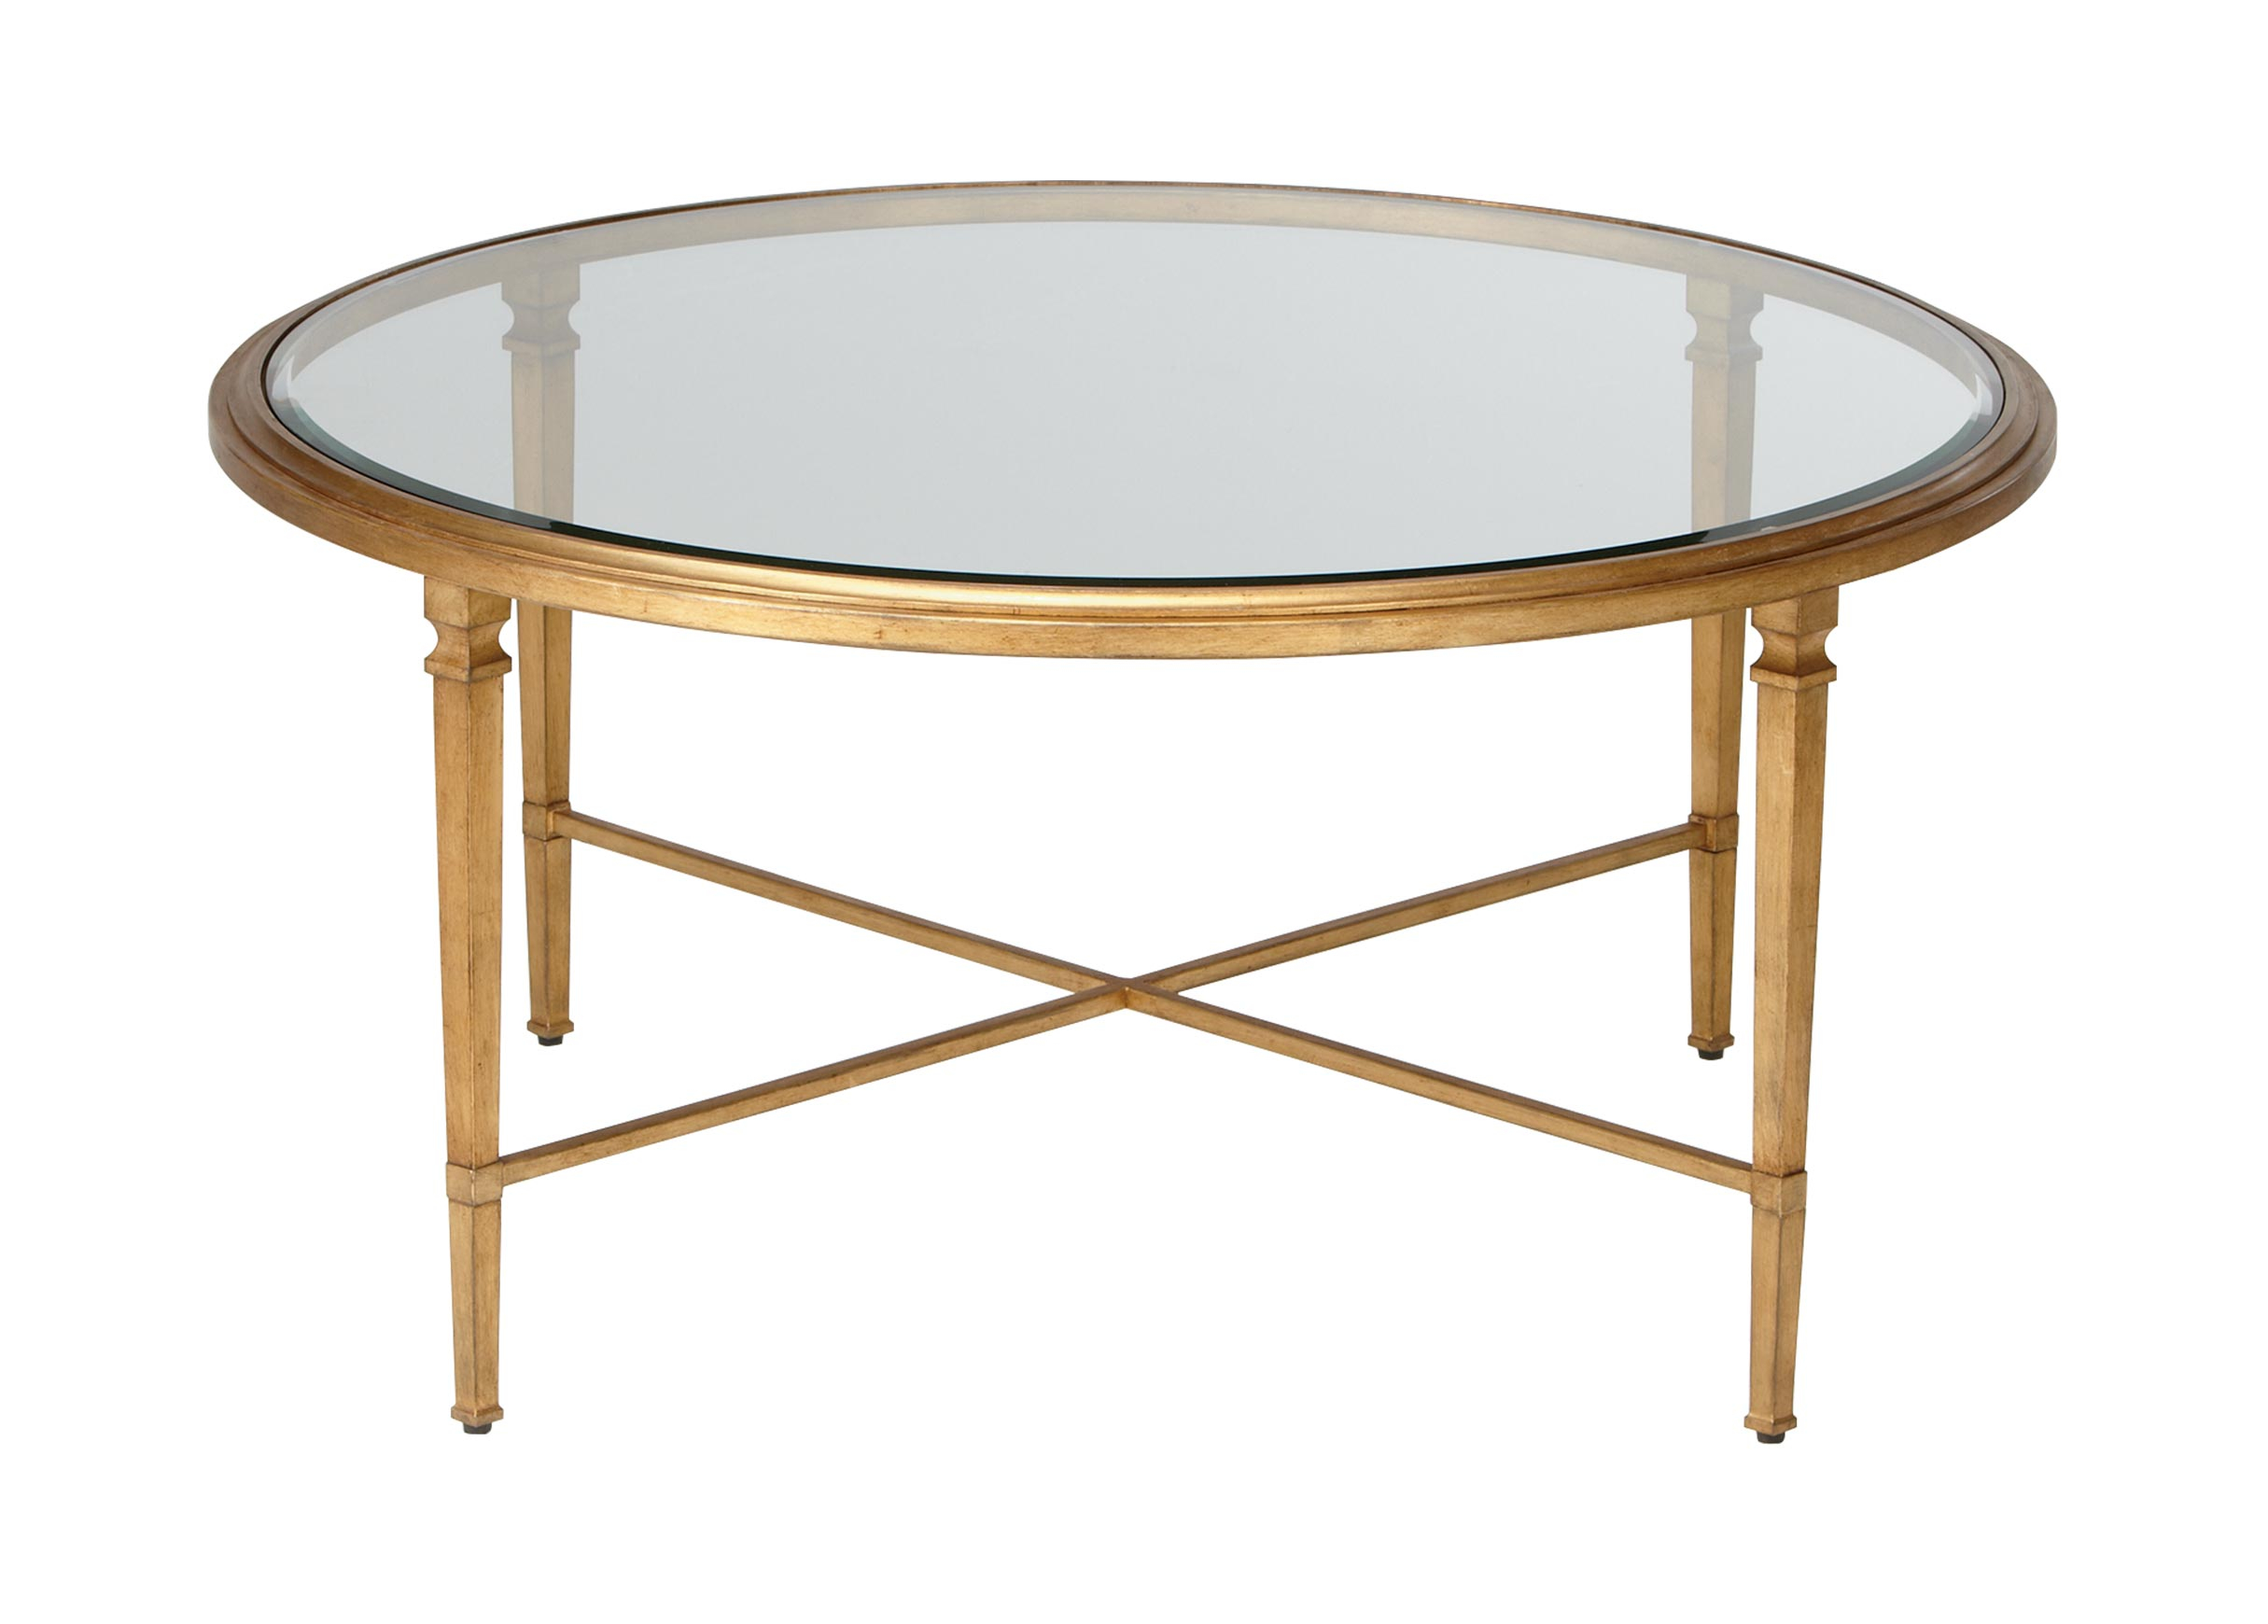 Heron Round Coffee Table Coffee Tables Ethan Allen pertaining to size 2430 X 1740